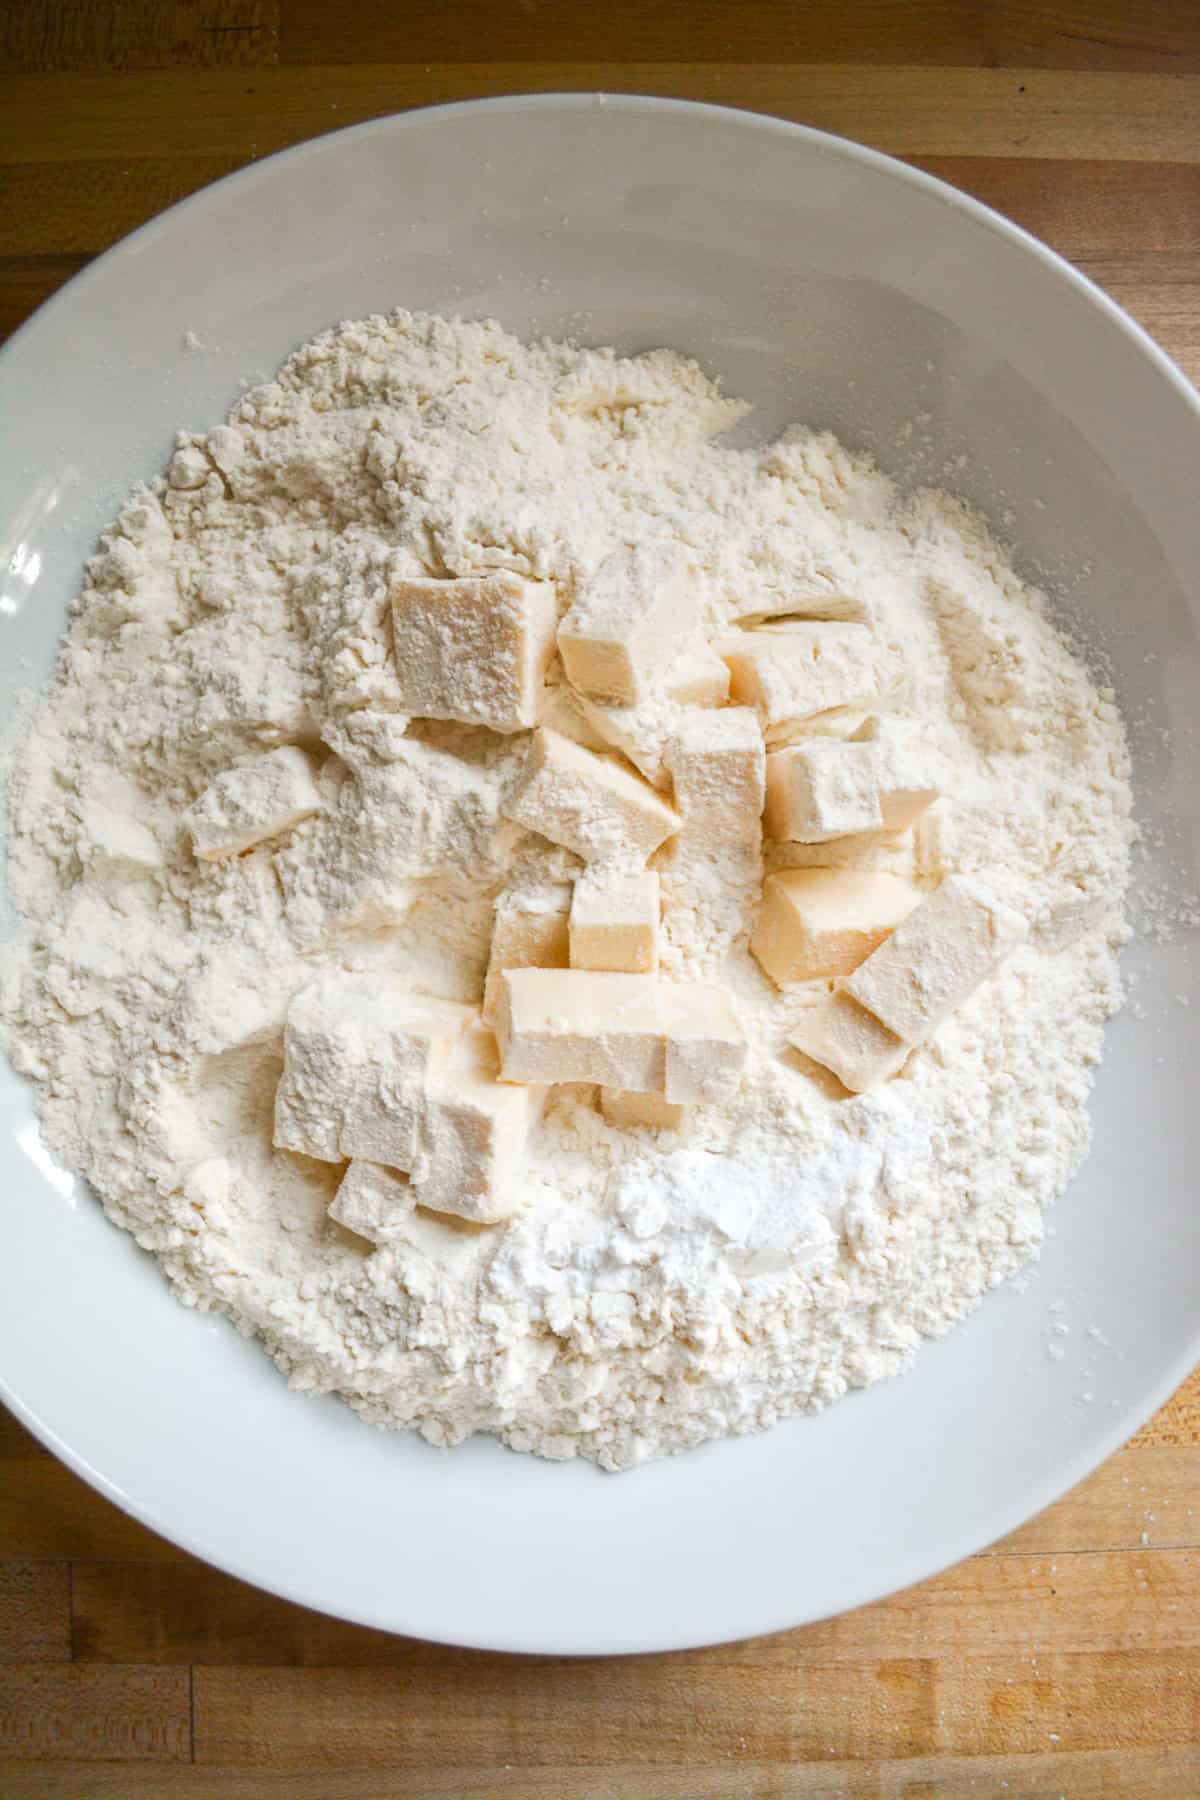 Dry ingredients and cold cubed vegan butter in a large mixing bowl.